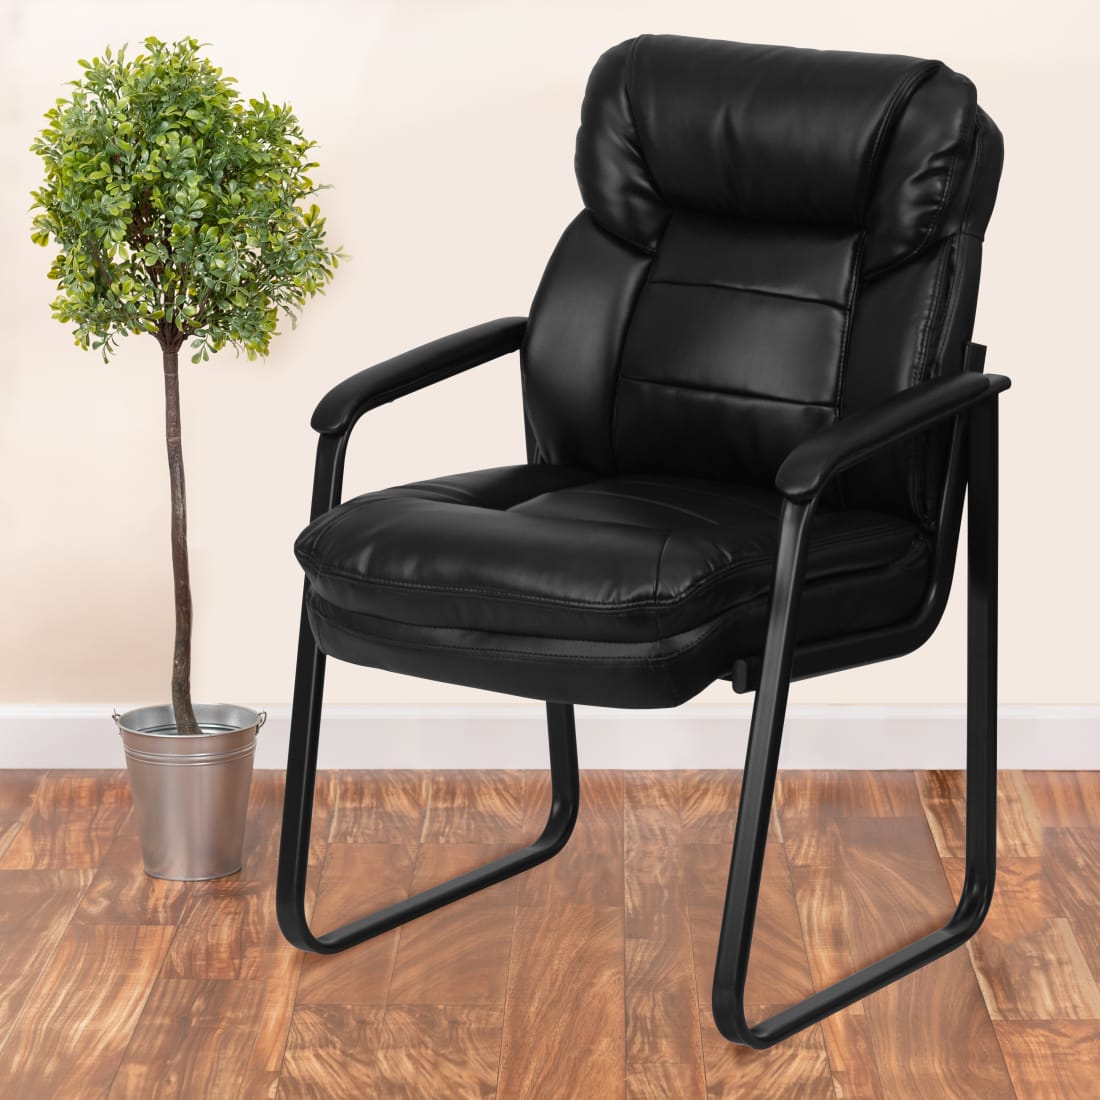 Black LeatherSoft Executive Side Reception Chair with Lumbar Support and Sled Base - GO1156BKLEAGG